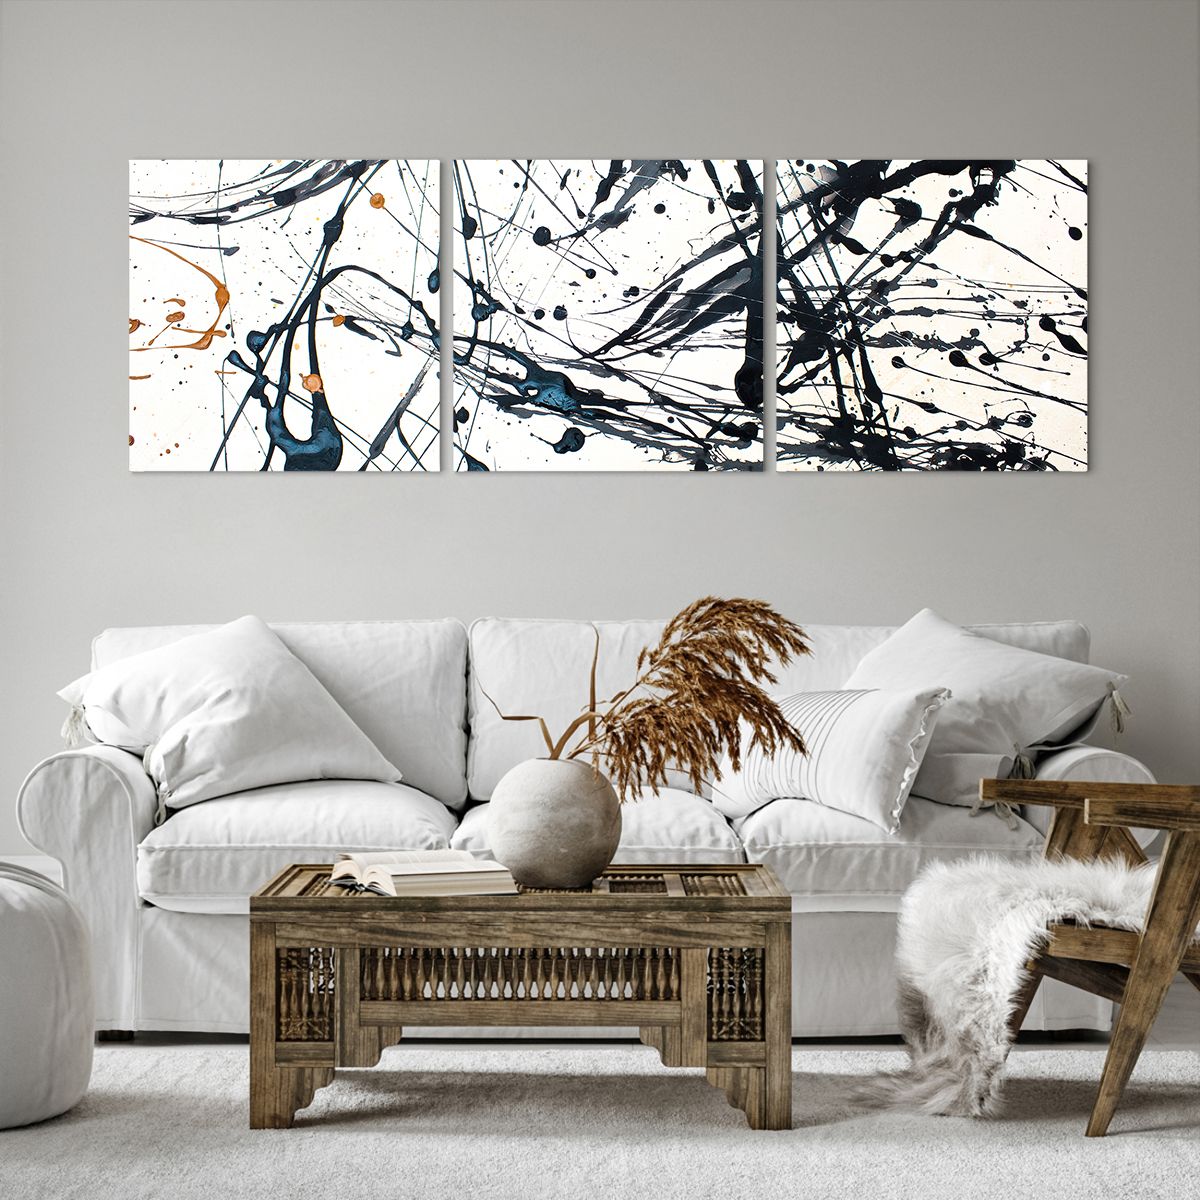 Impression sur toile Abstraction, Impression sur toile Graphique, Impression sur toile Art, Impression sur toile Peindre, Impression sur toile Art Moderne